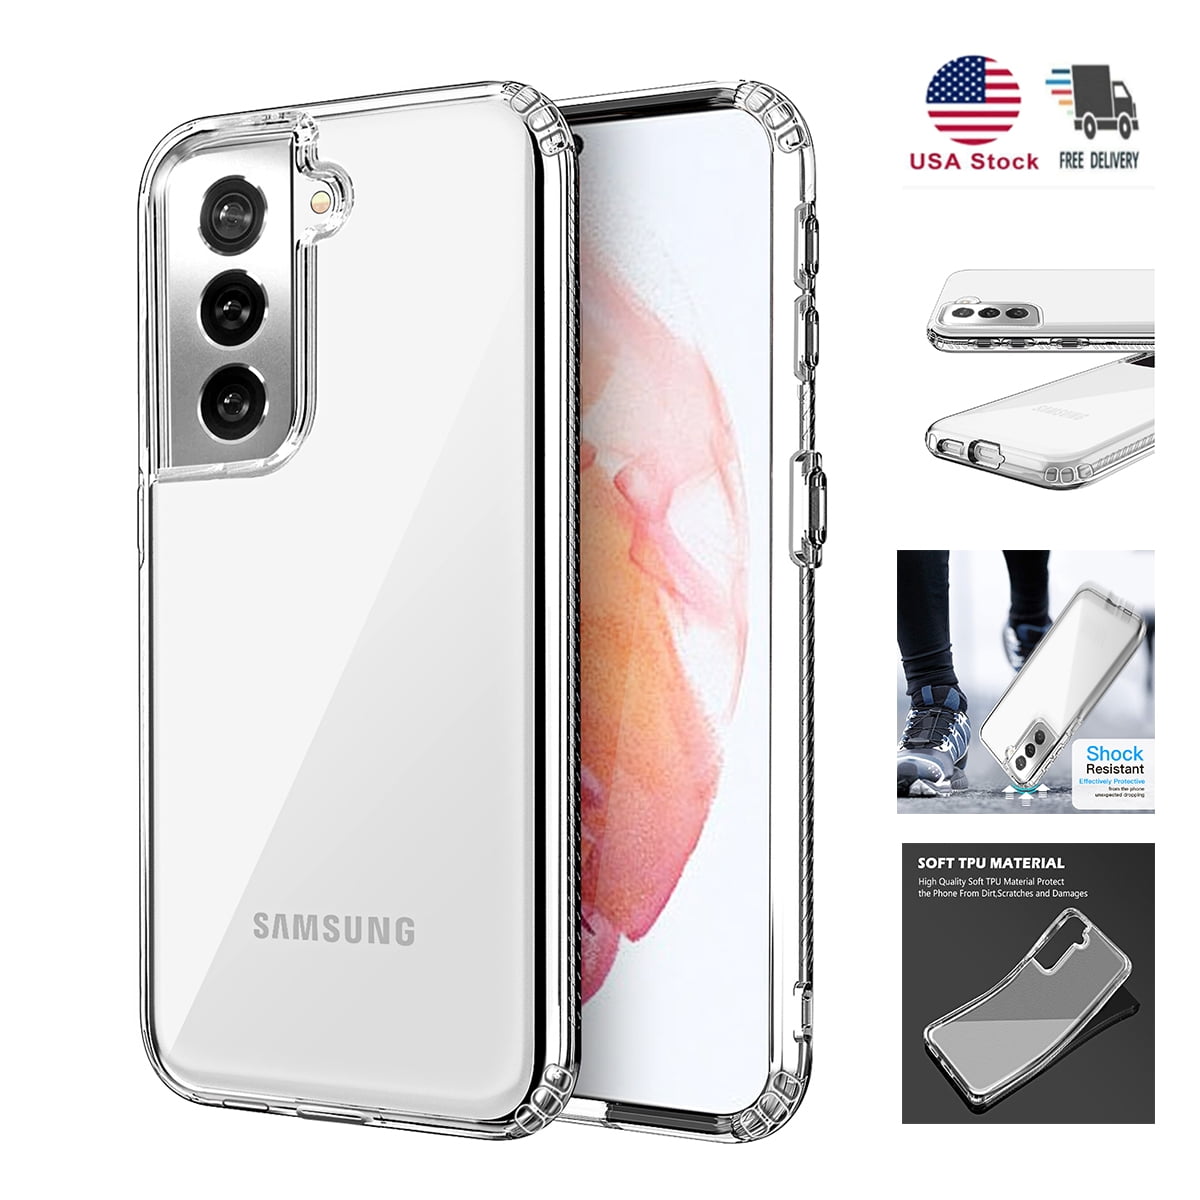 Galaxy S21 Case Crystal Clear Shockproof Bumper Protective Cell Phone Back Cover for Samsung Galaxy S21 5G Transparent TPU Slim Fit Flexible Skin for Men Women Boy Girl Rubber Silicone 4 Corners